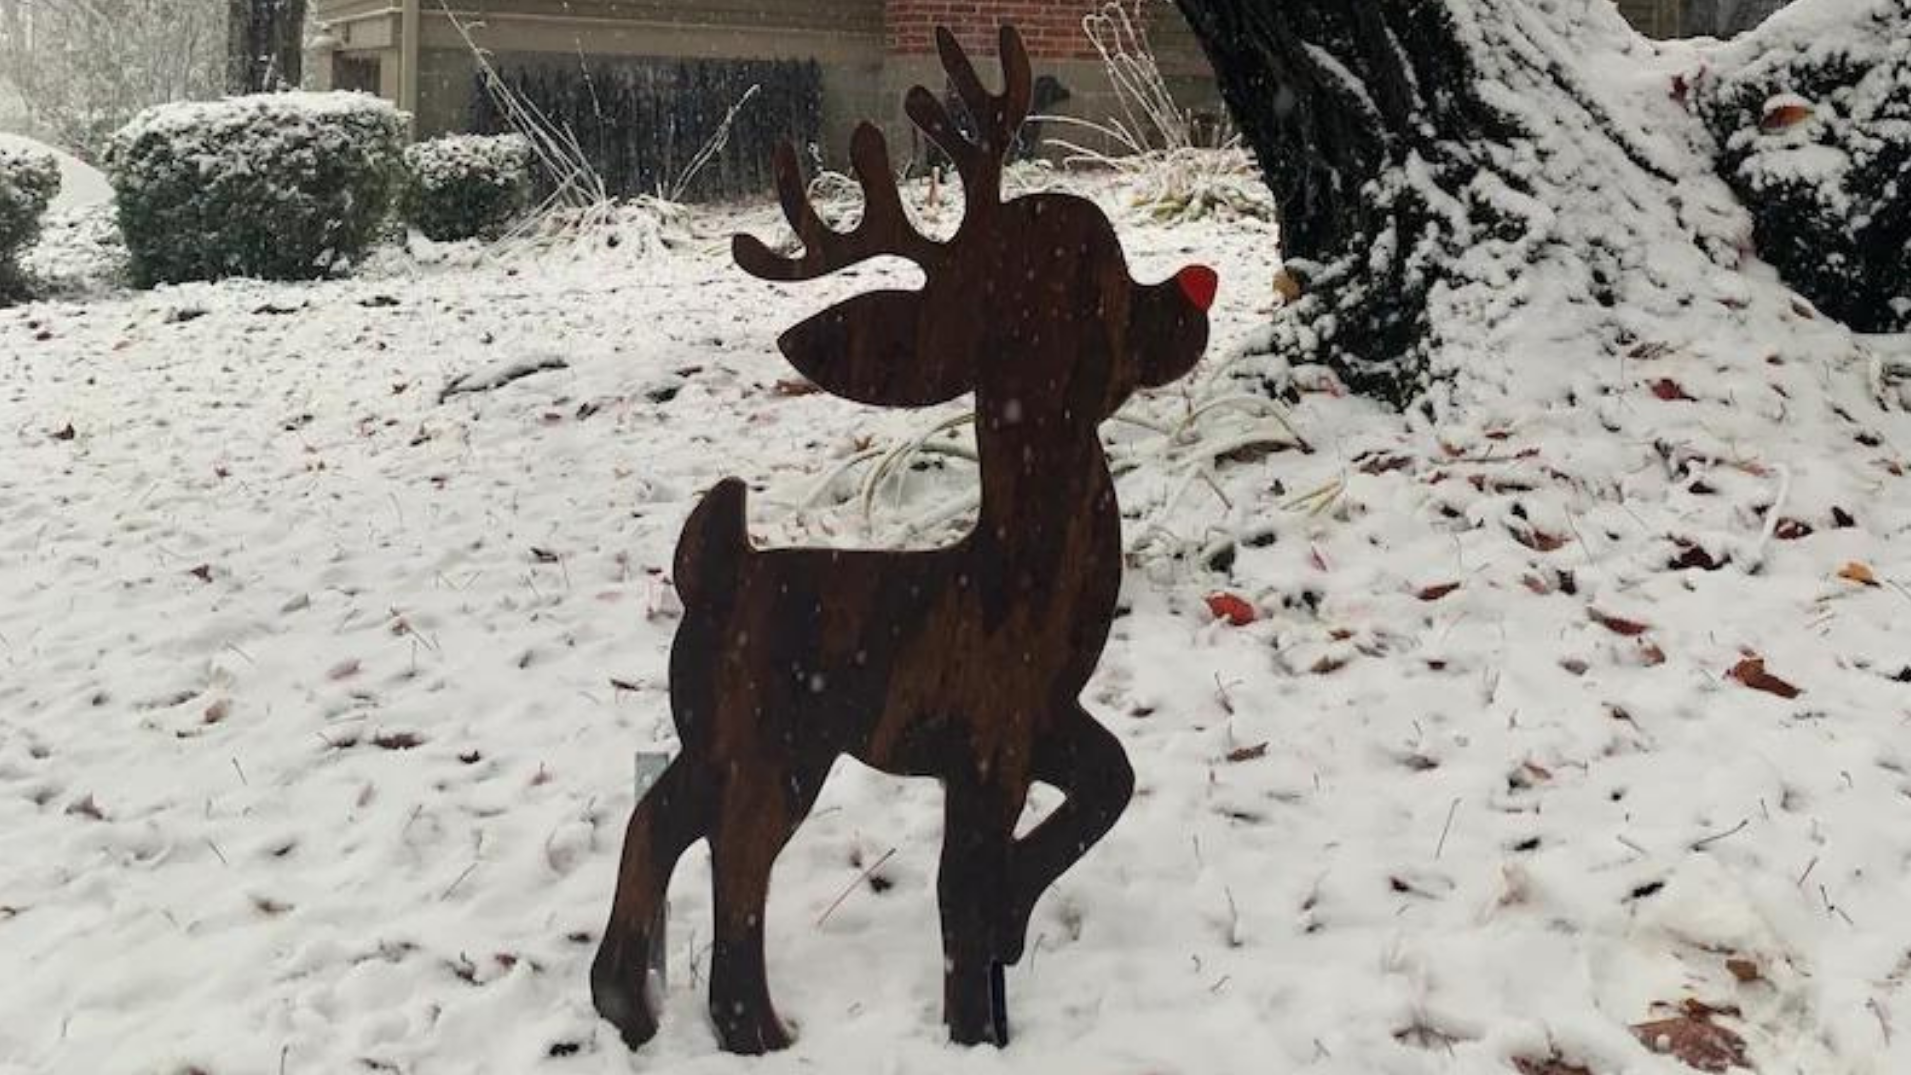 This wooden cut-out of Rudolph the Reindeer prancing across the yard will bring whimsy and joy to the whole neighborhood.